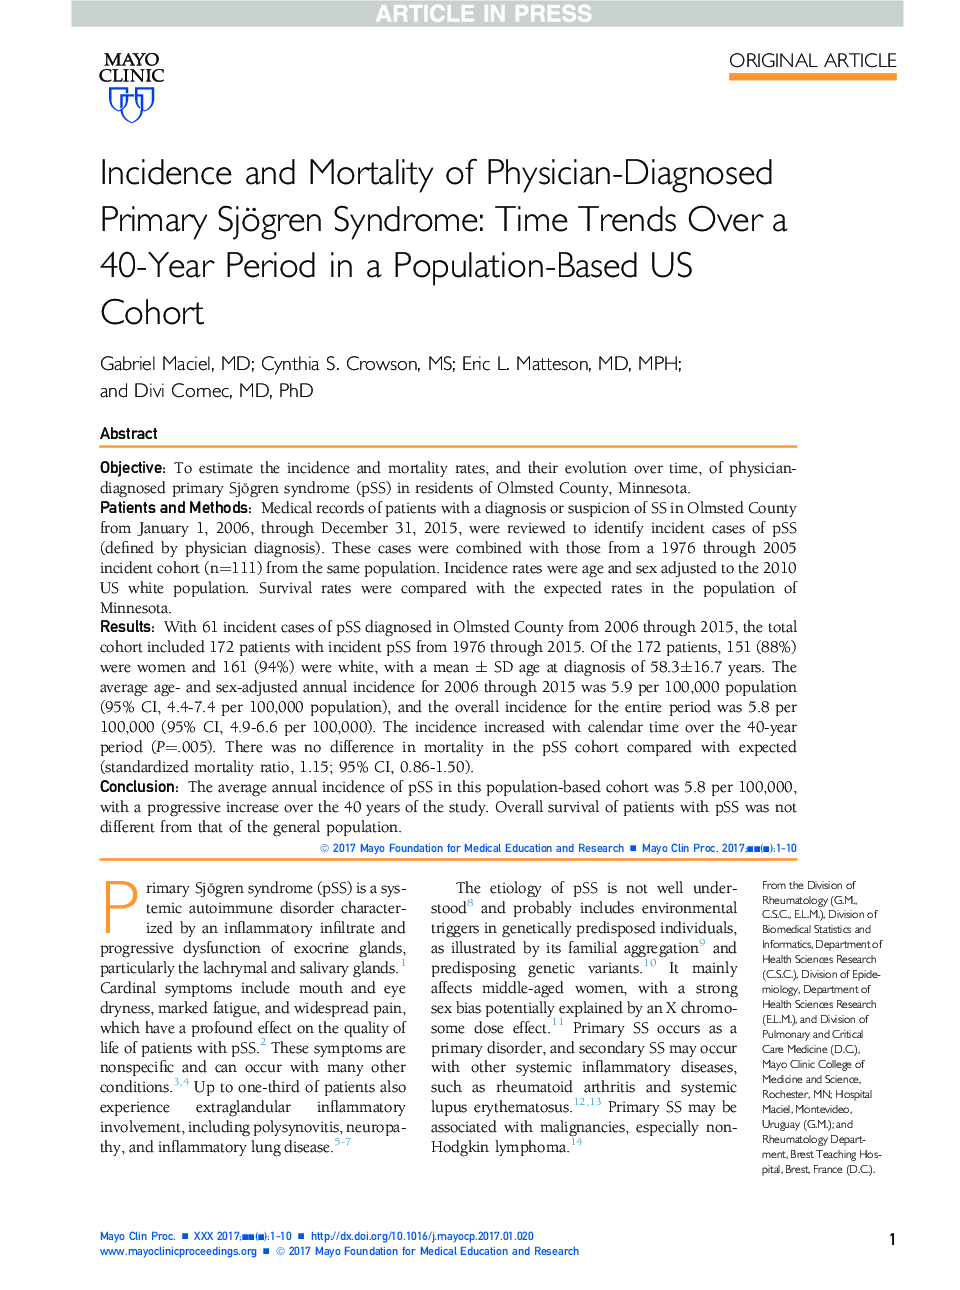 Incidence and Mortality of Physician-Diagnosed Primary Sjögren Syndrome